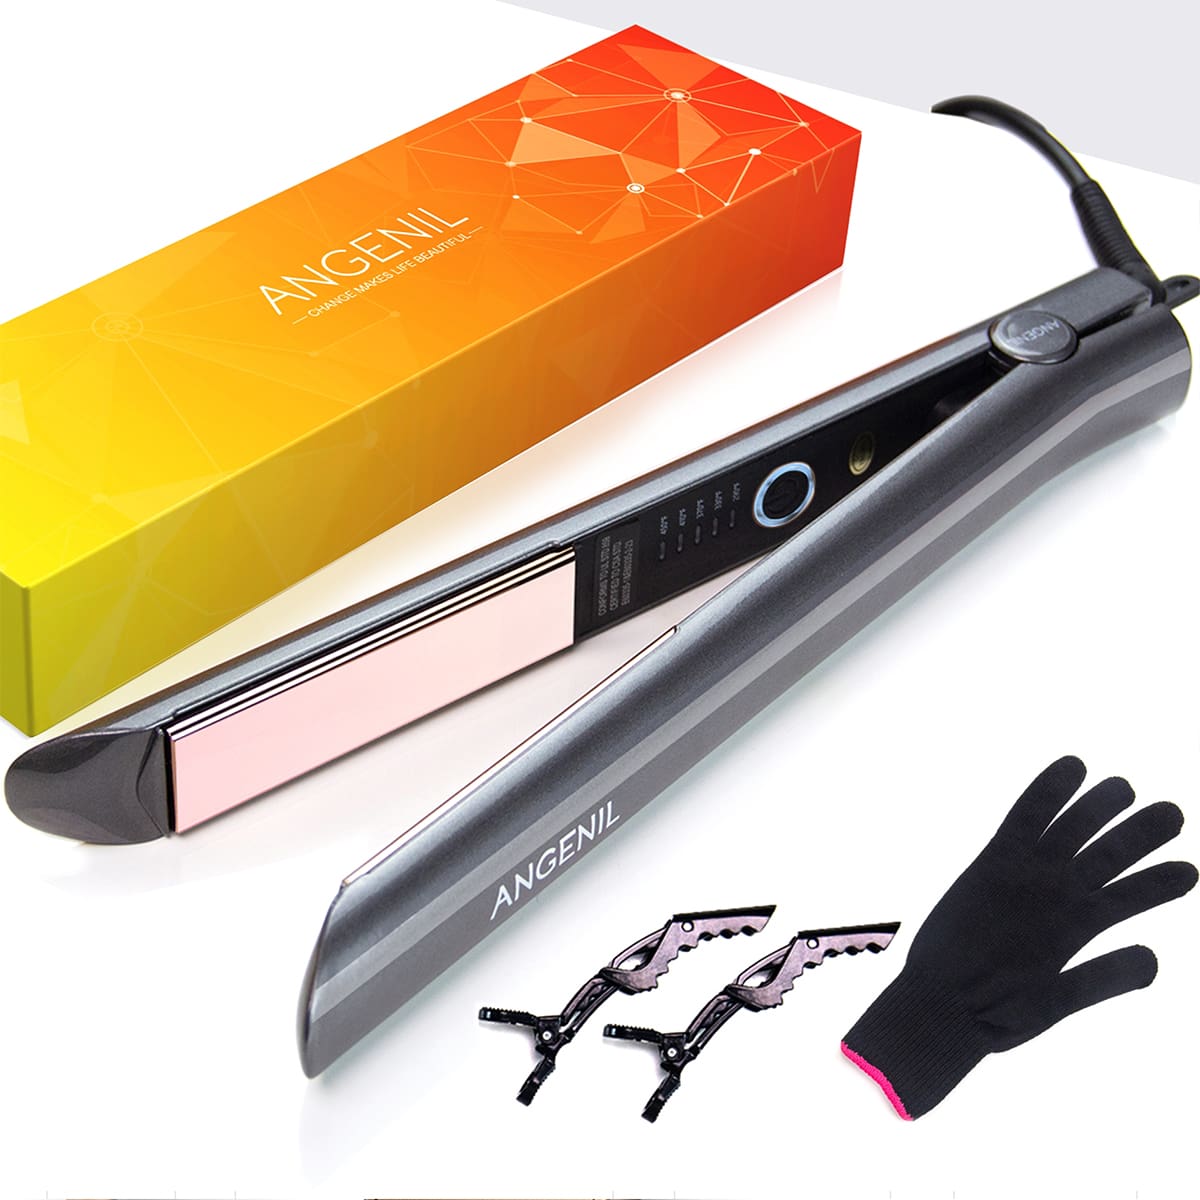 SHEIN 【US】ANGENIL Professional Titanium Flat Iron Hair Straightener and Curlers 2 in 1, Straightening Curling Hair Styling Irons for Women All Hair Types, Fast Heating, 1 inch Dual Voltage Travel Flat Iron, 360° Swivel Cord Grey US Plug